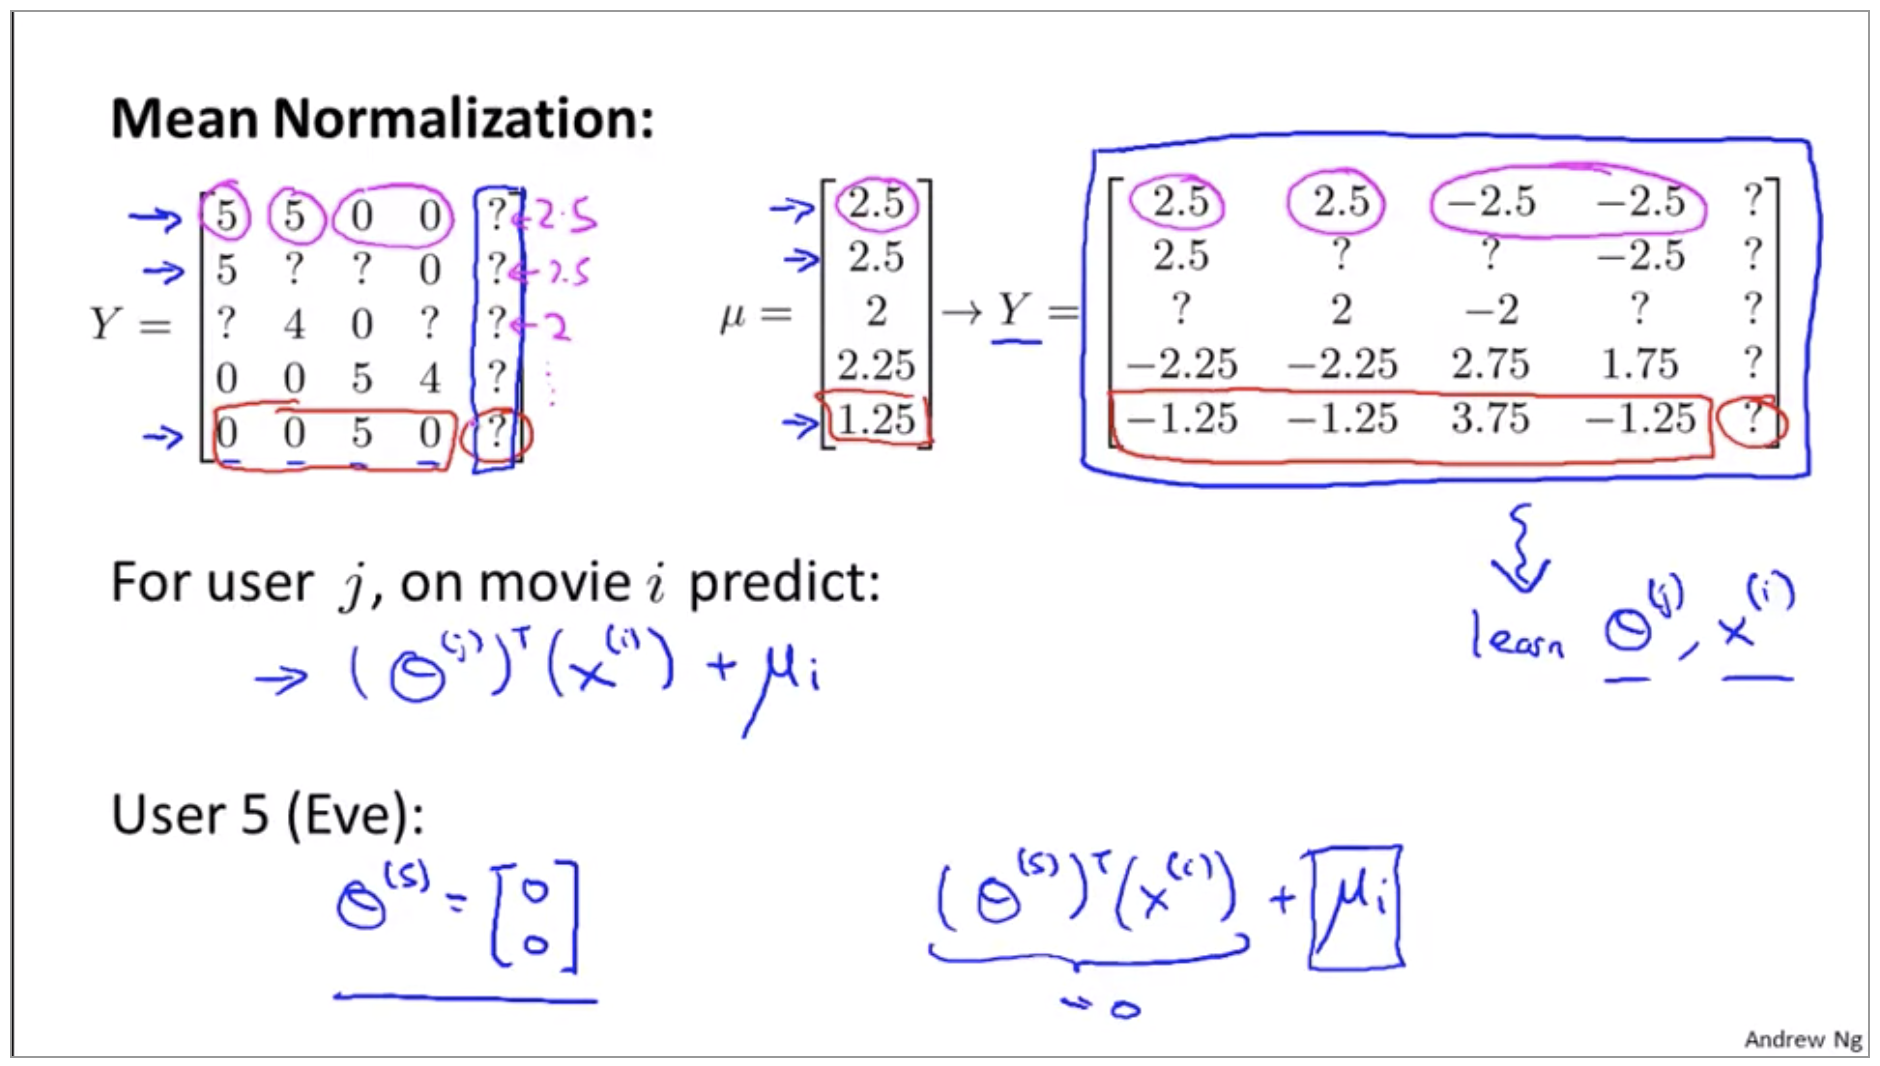 collaborative-filtering-mean-normalization-2.png